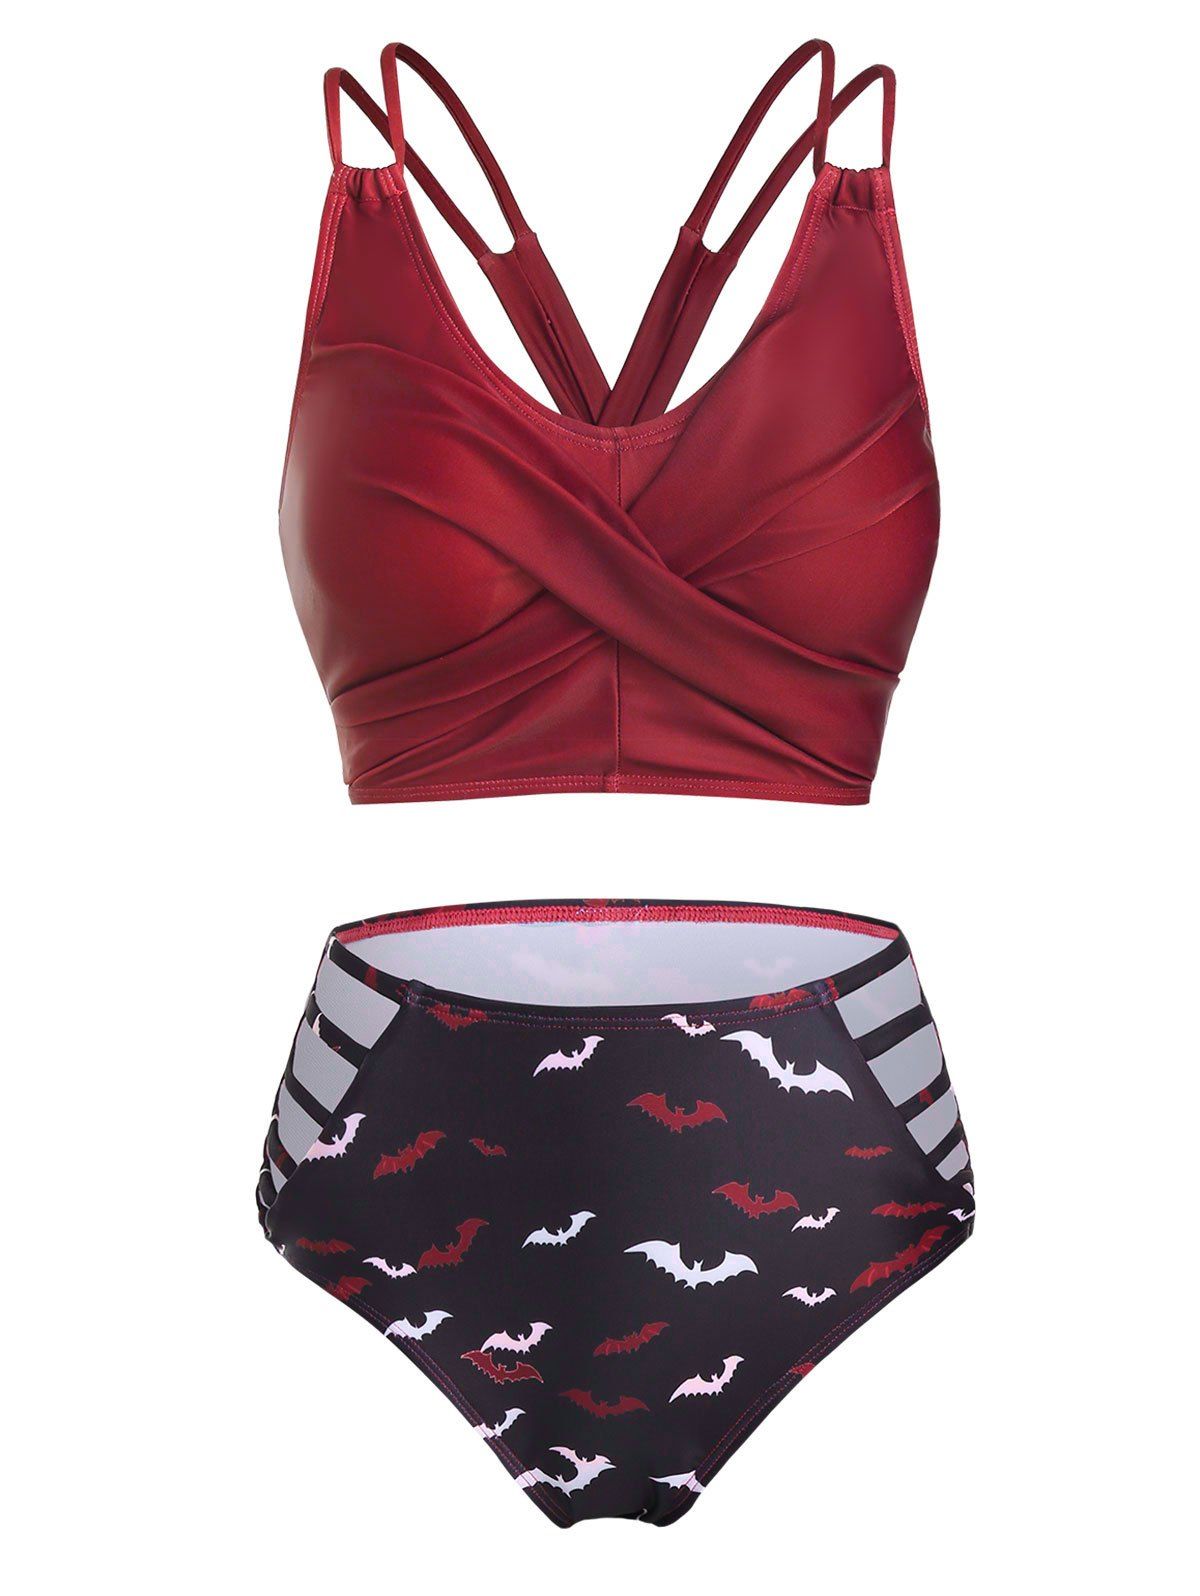 Gothic Bikini Swimwear Bat Print High Waist Swimsuit Lace-up Crossover Cut Out Two Piece Bathing Suit - RED WINE M